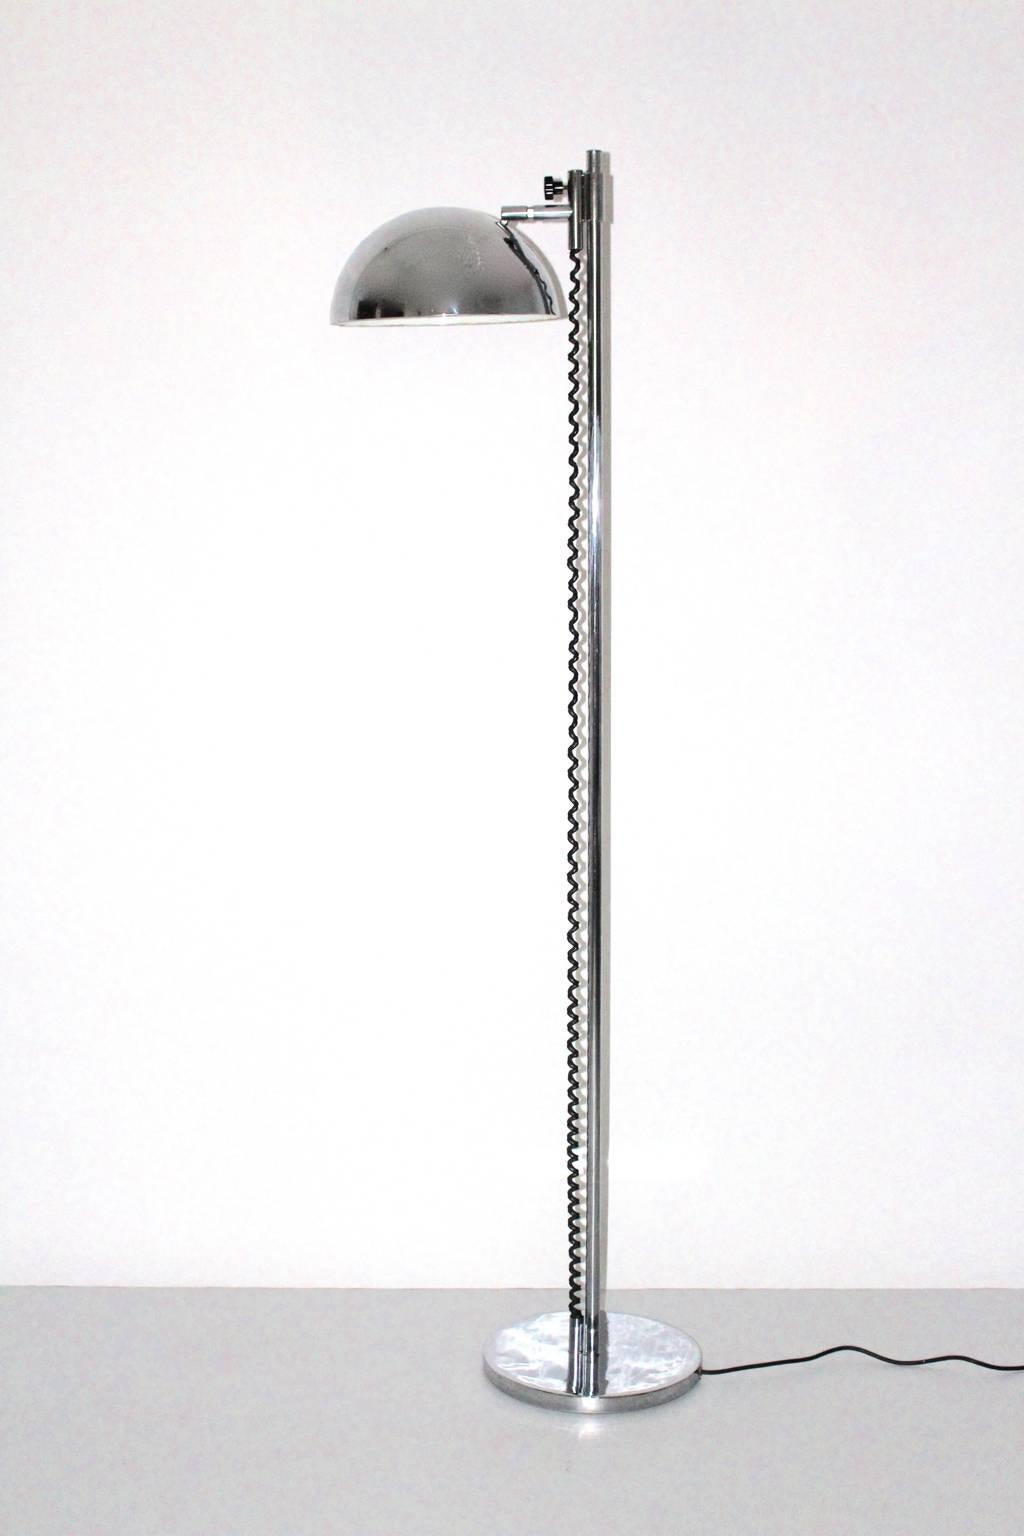 Mid Century Modern vintage floor lamp, which was designed in Italy 1960s.
The floor lamp from chrome-plated steel, while the shade is adjustable from up to down and rotatable in all directions.
Foot switch
The height is maximum 63.78 in (162